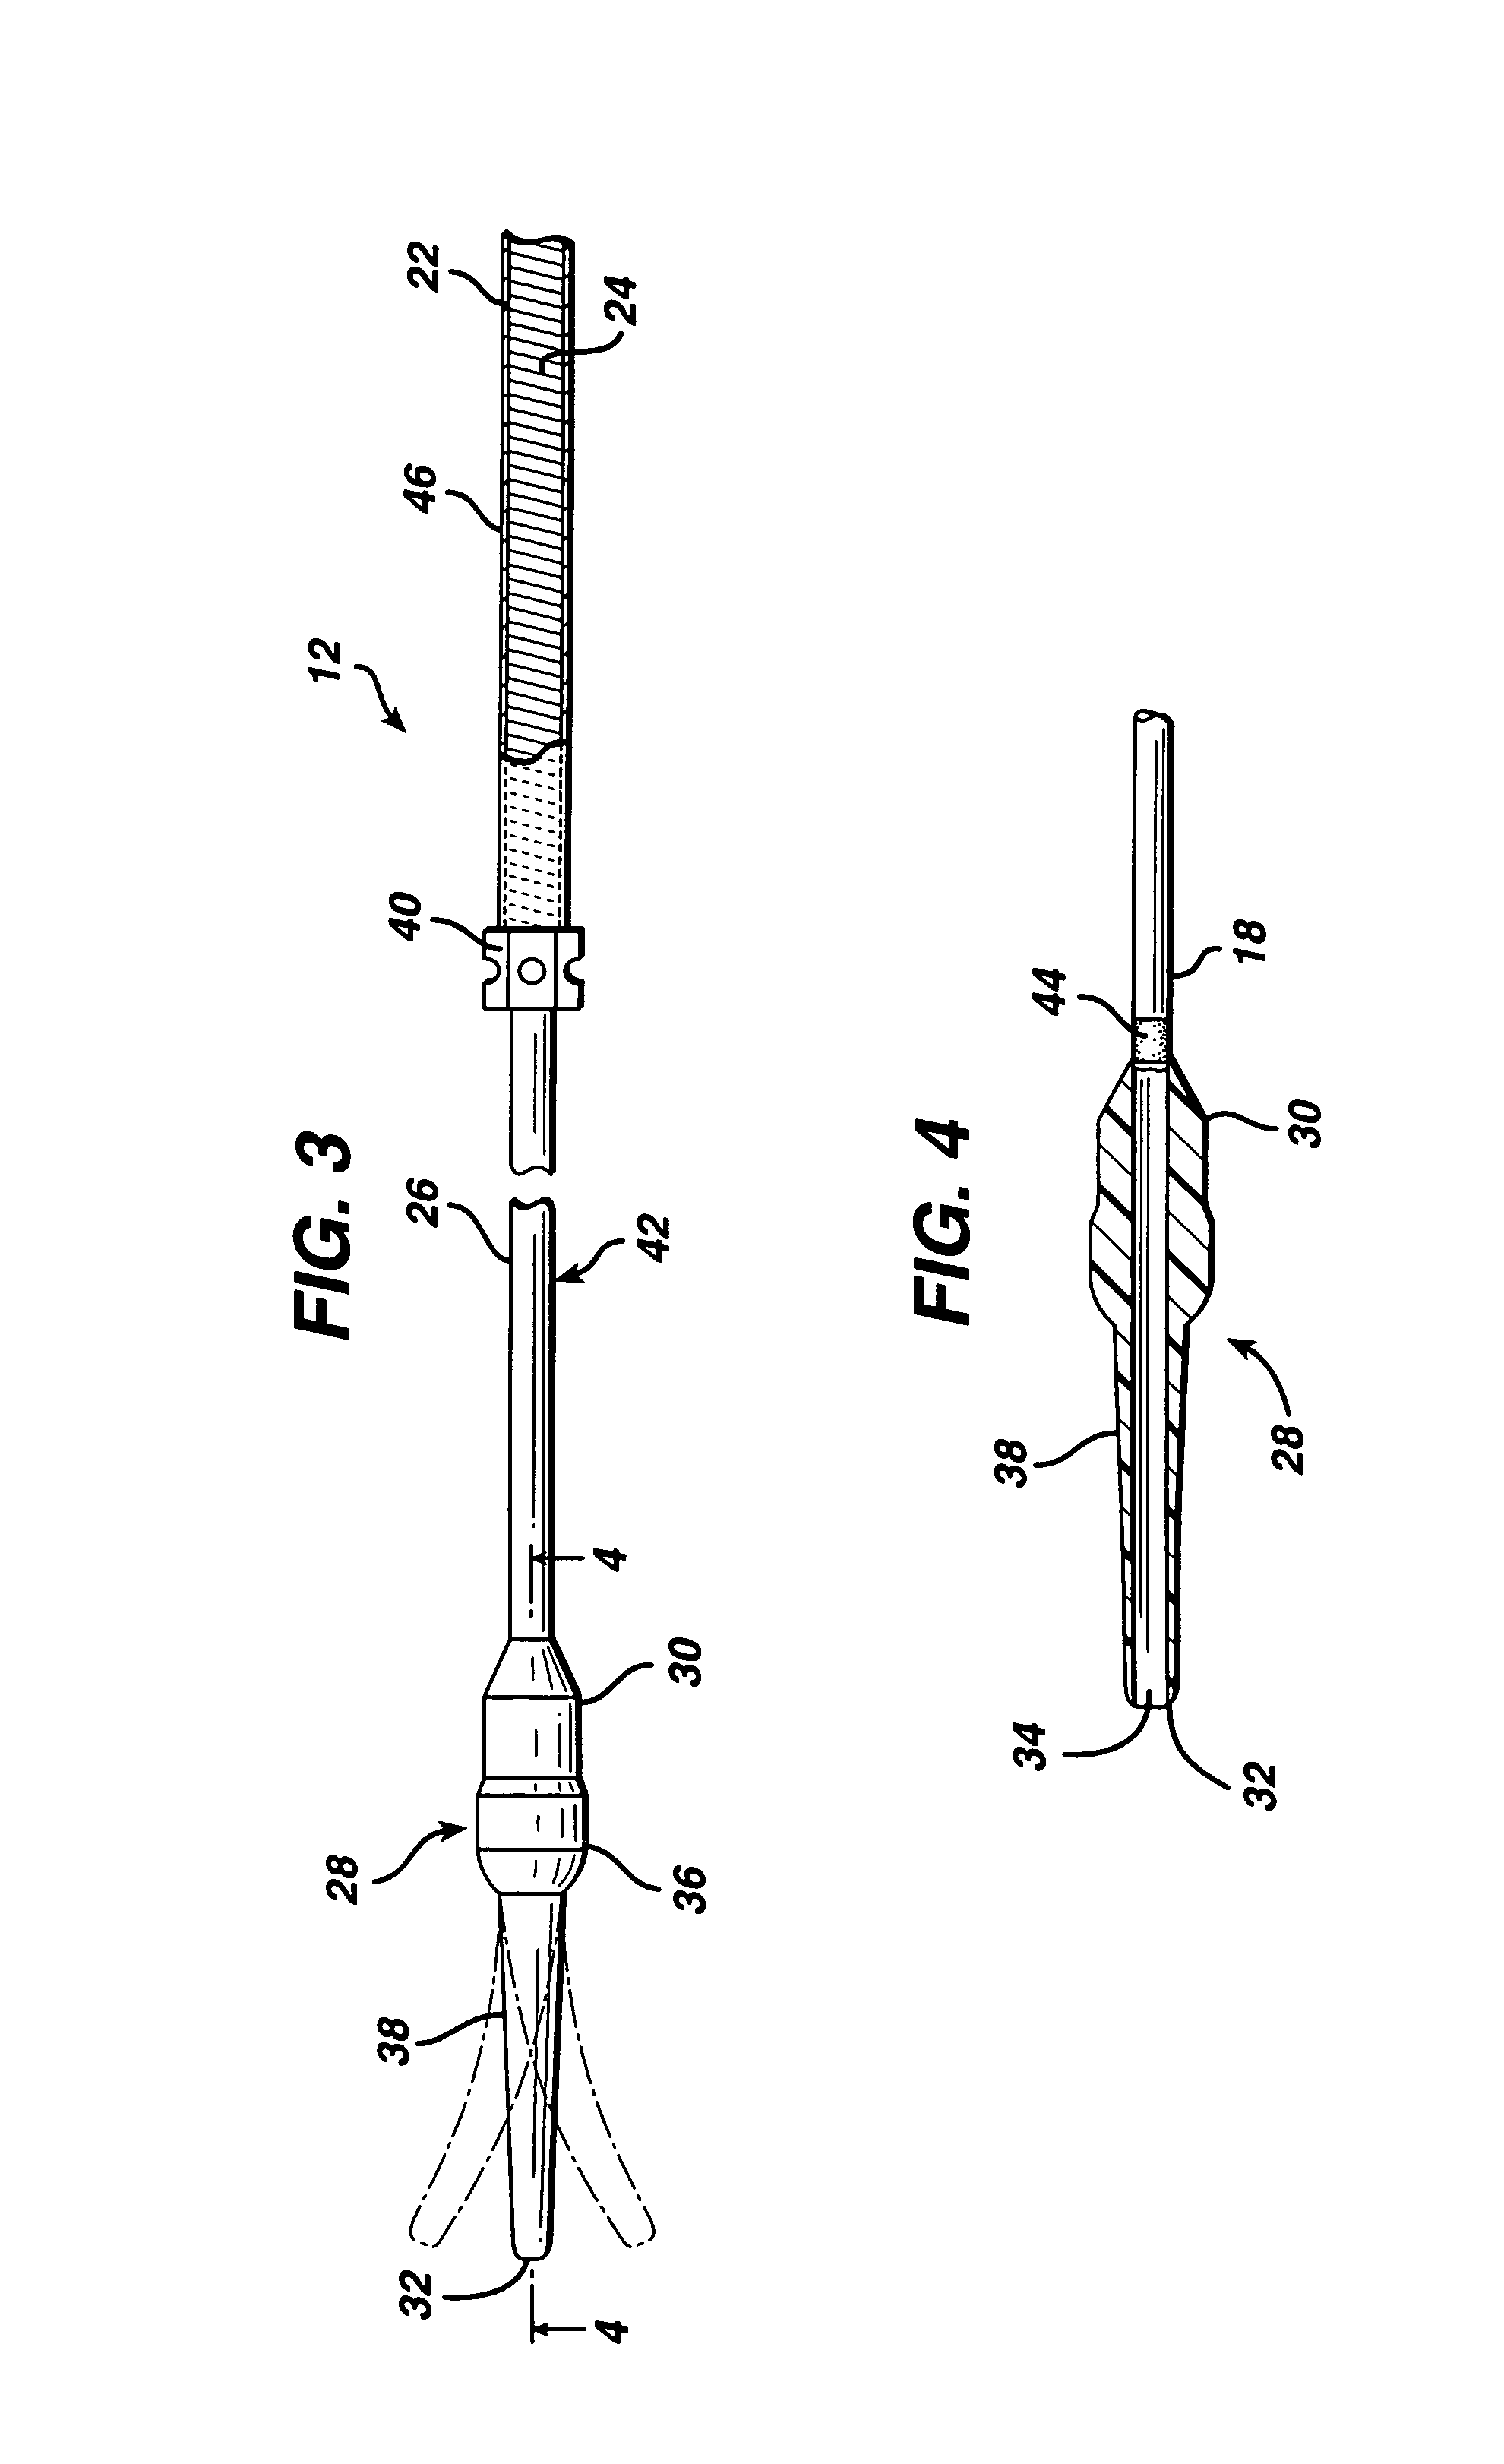 Self-expanding stent delivery system